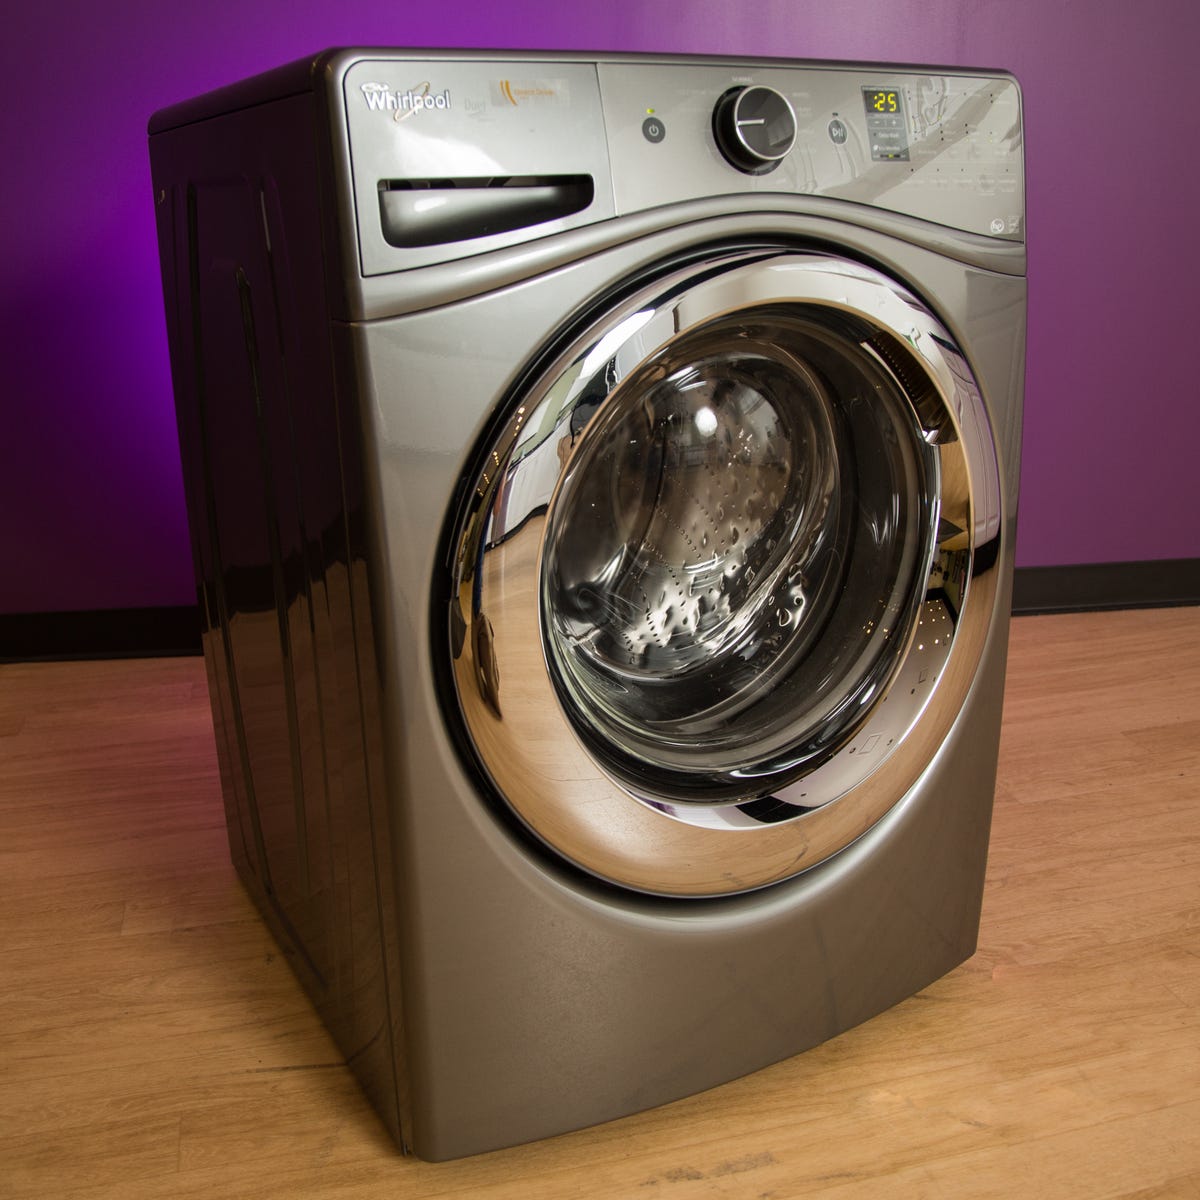 Whirlpool WFW87HEDW review: This simple washing machine nails the